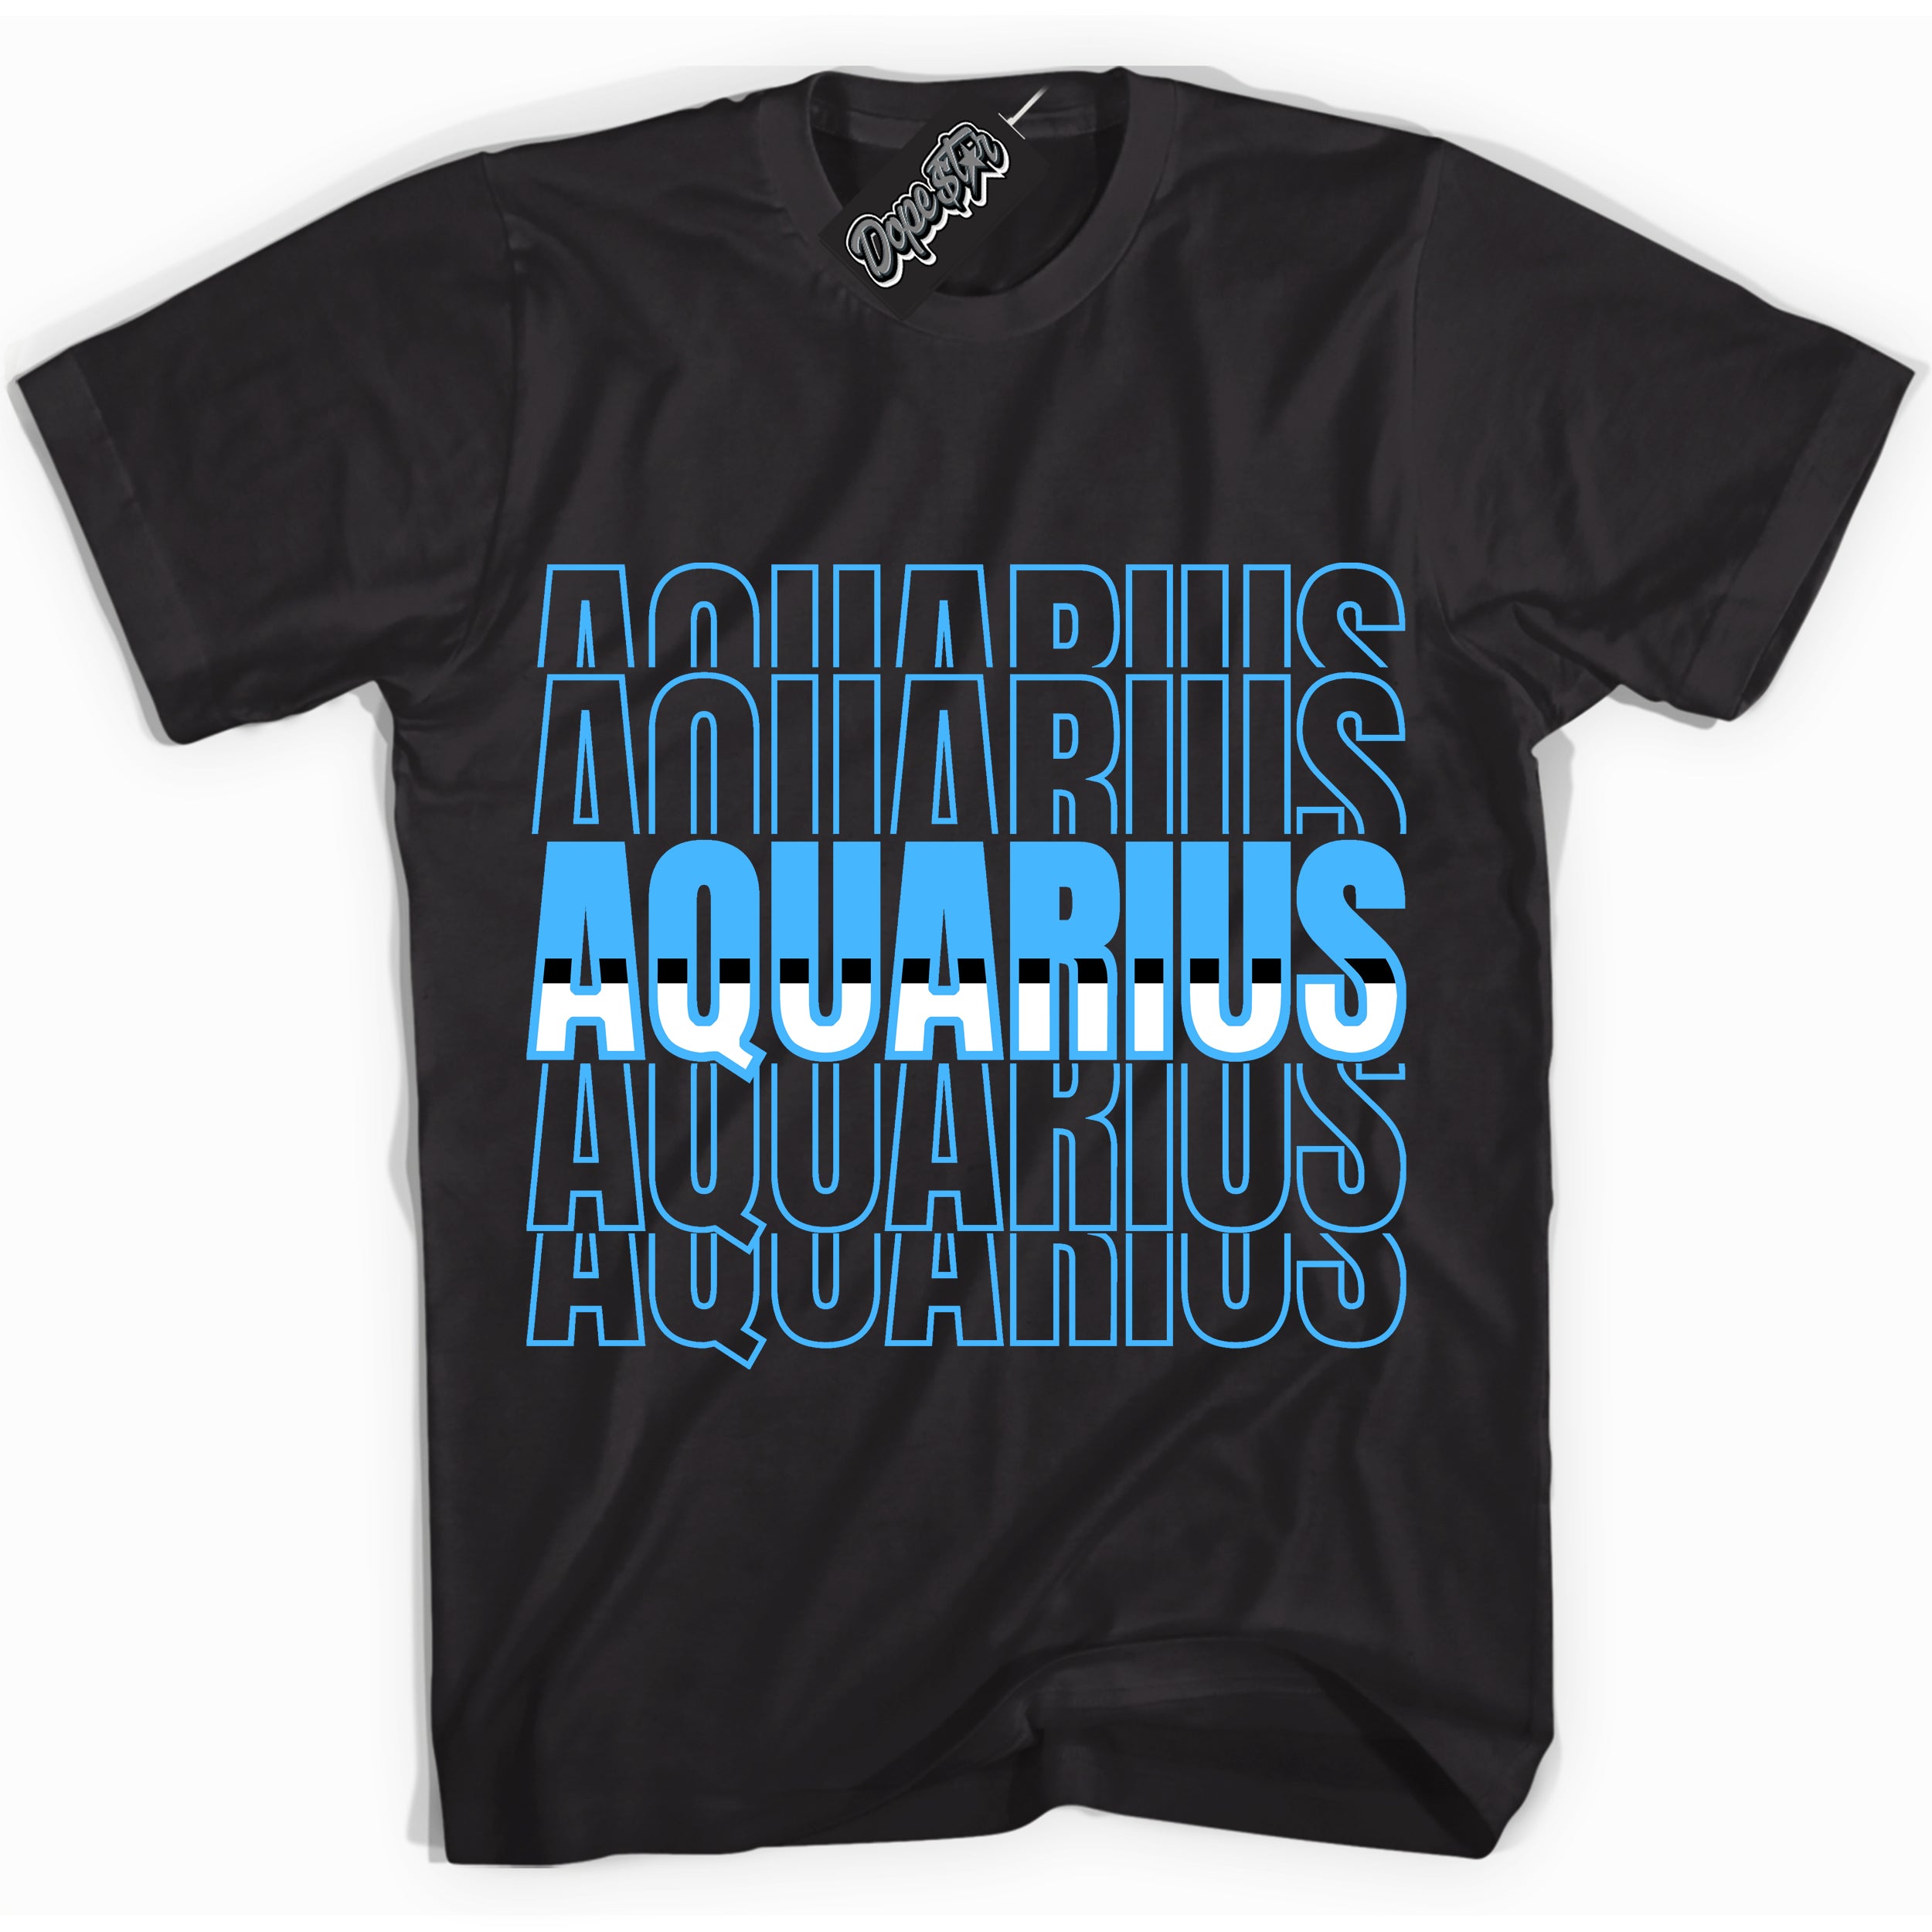 Cool Black graphic tee with “ Aquarius ” design, that perfectly matches Powder Blue 9s sneakers 